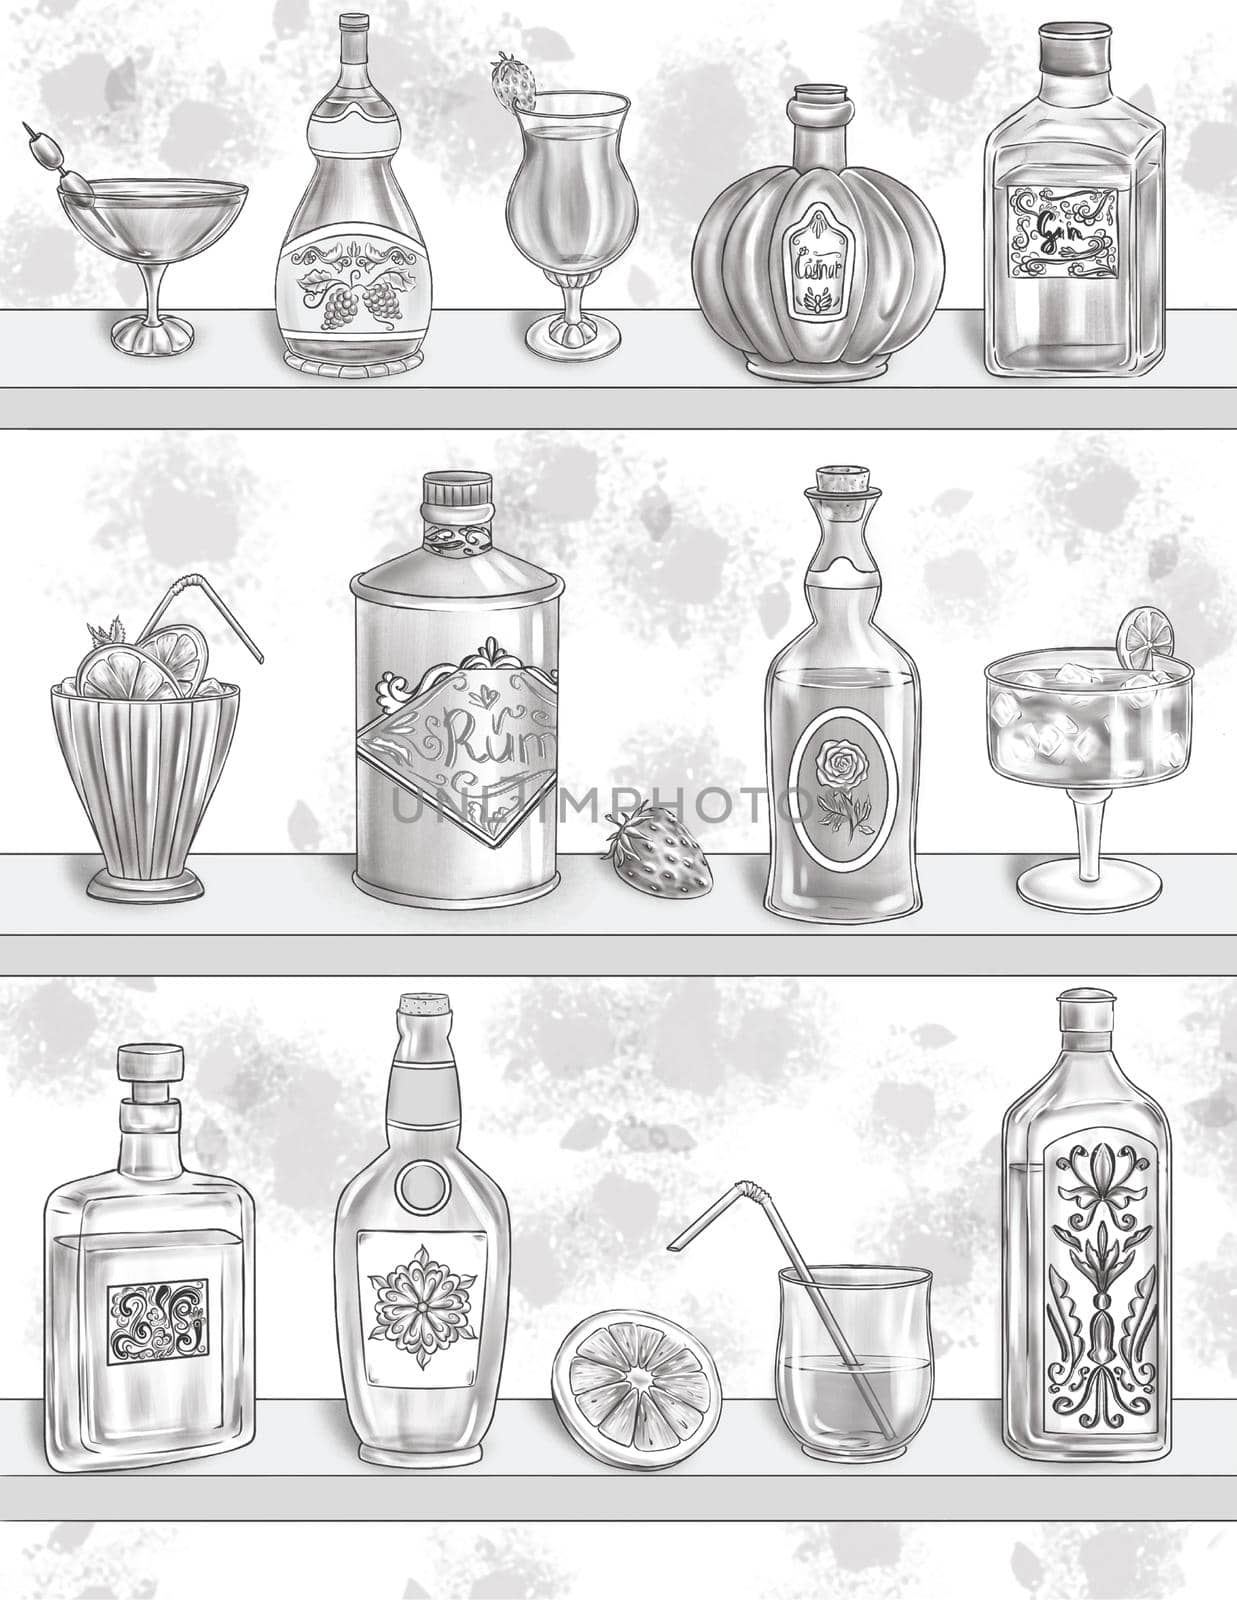 Multiple Alcoholic Bottles With Different Glasses For Each Drink Colorless Line Drawing. Glass Container For Alcohol Beverage Paired With Drinking Cups Coloring Book Page. by nialowwa